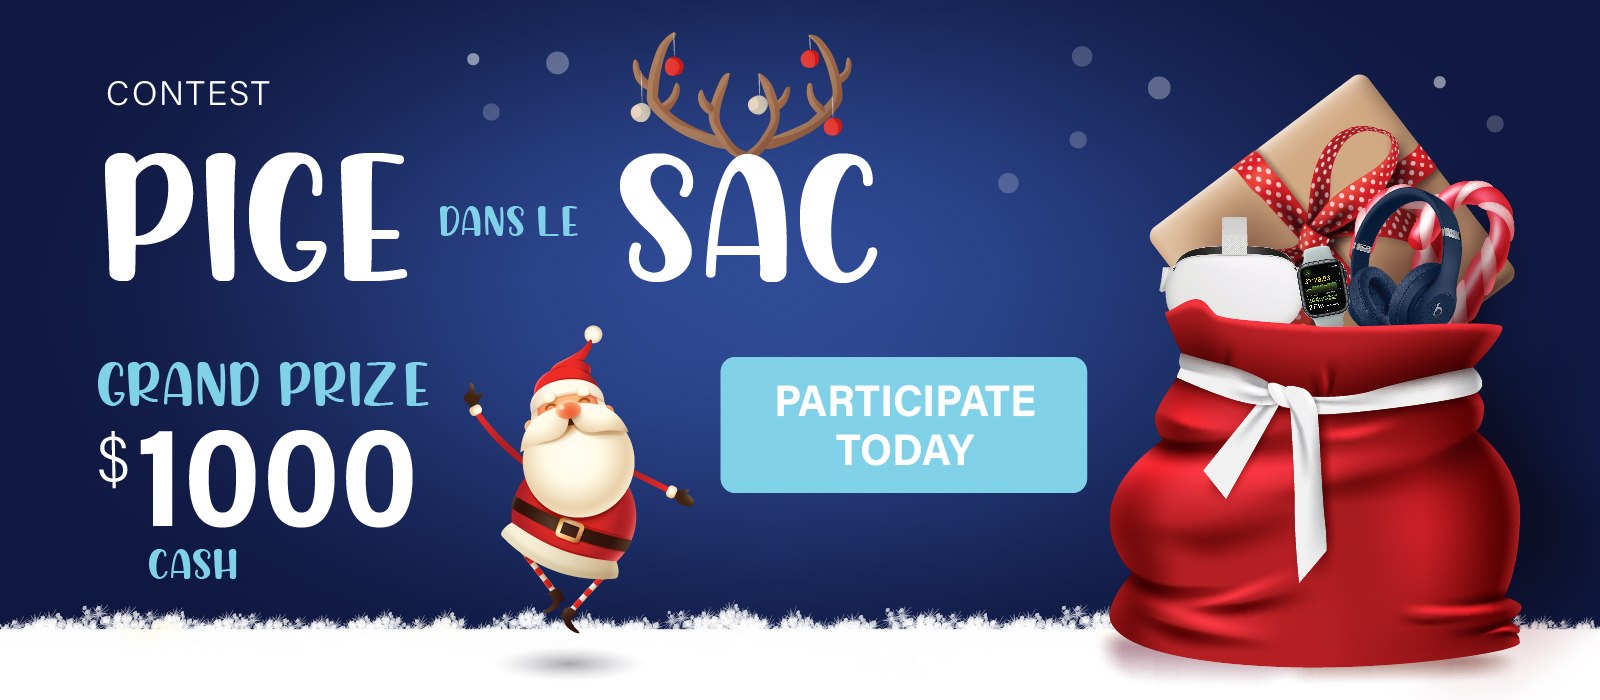 Text Reading 'Contest Pige dans le Sac. Grand Prize: $1000 cash. To 'Participate Today', click on the button on the left.'